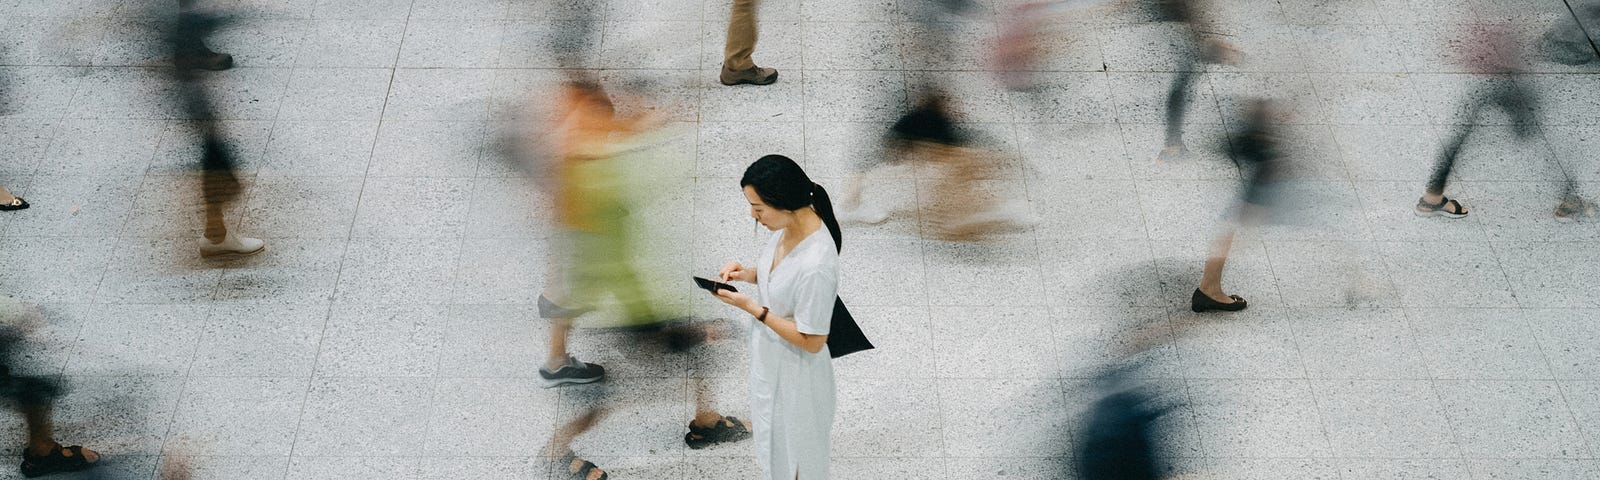 An overhead photo of an Asian woman standing still as blurred people walk by her.